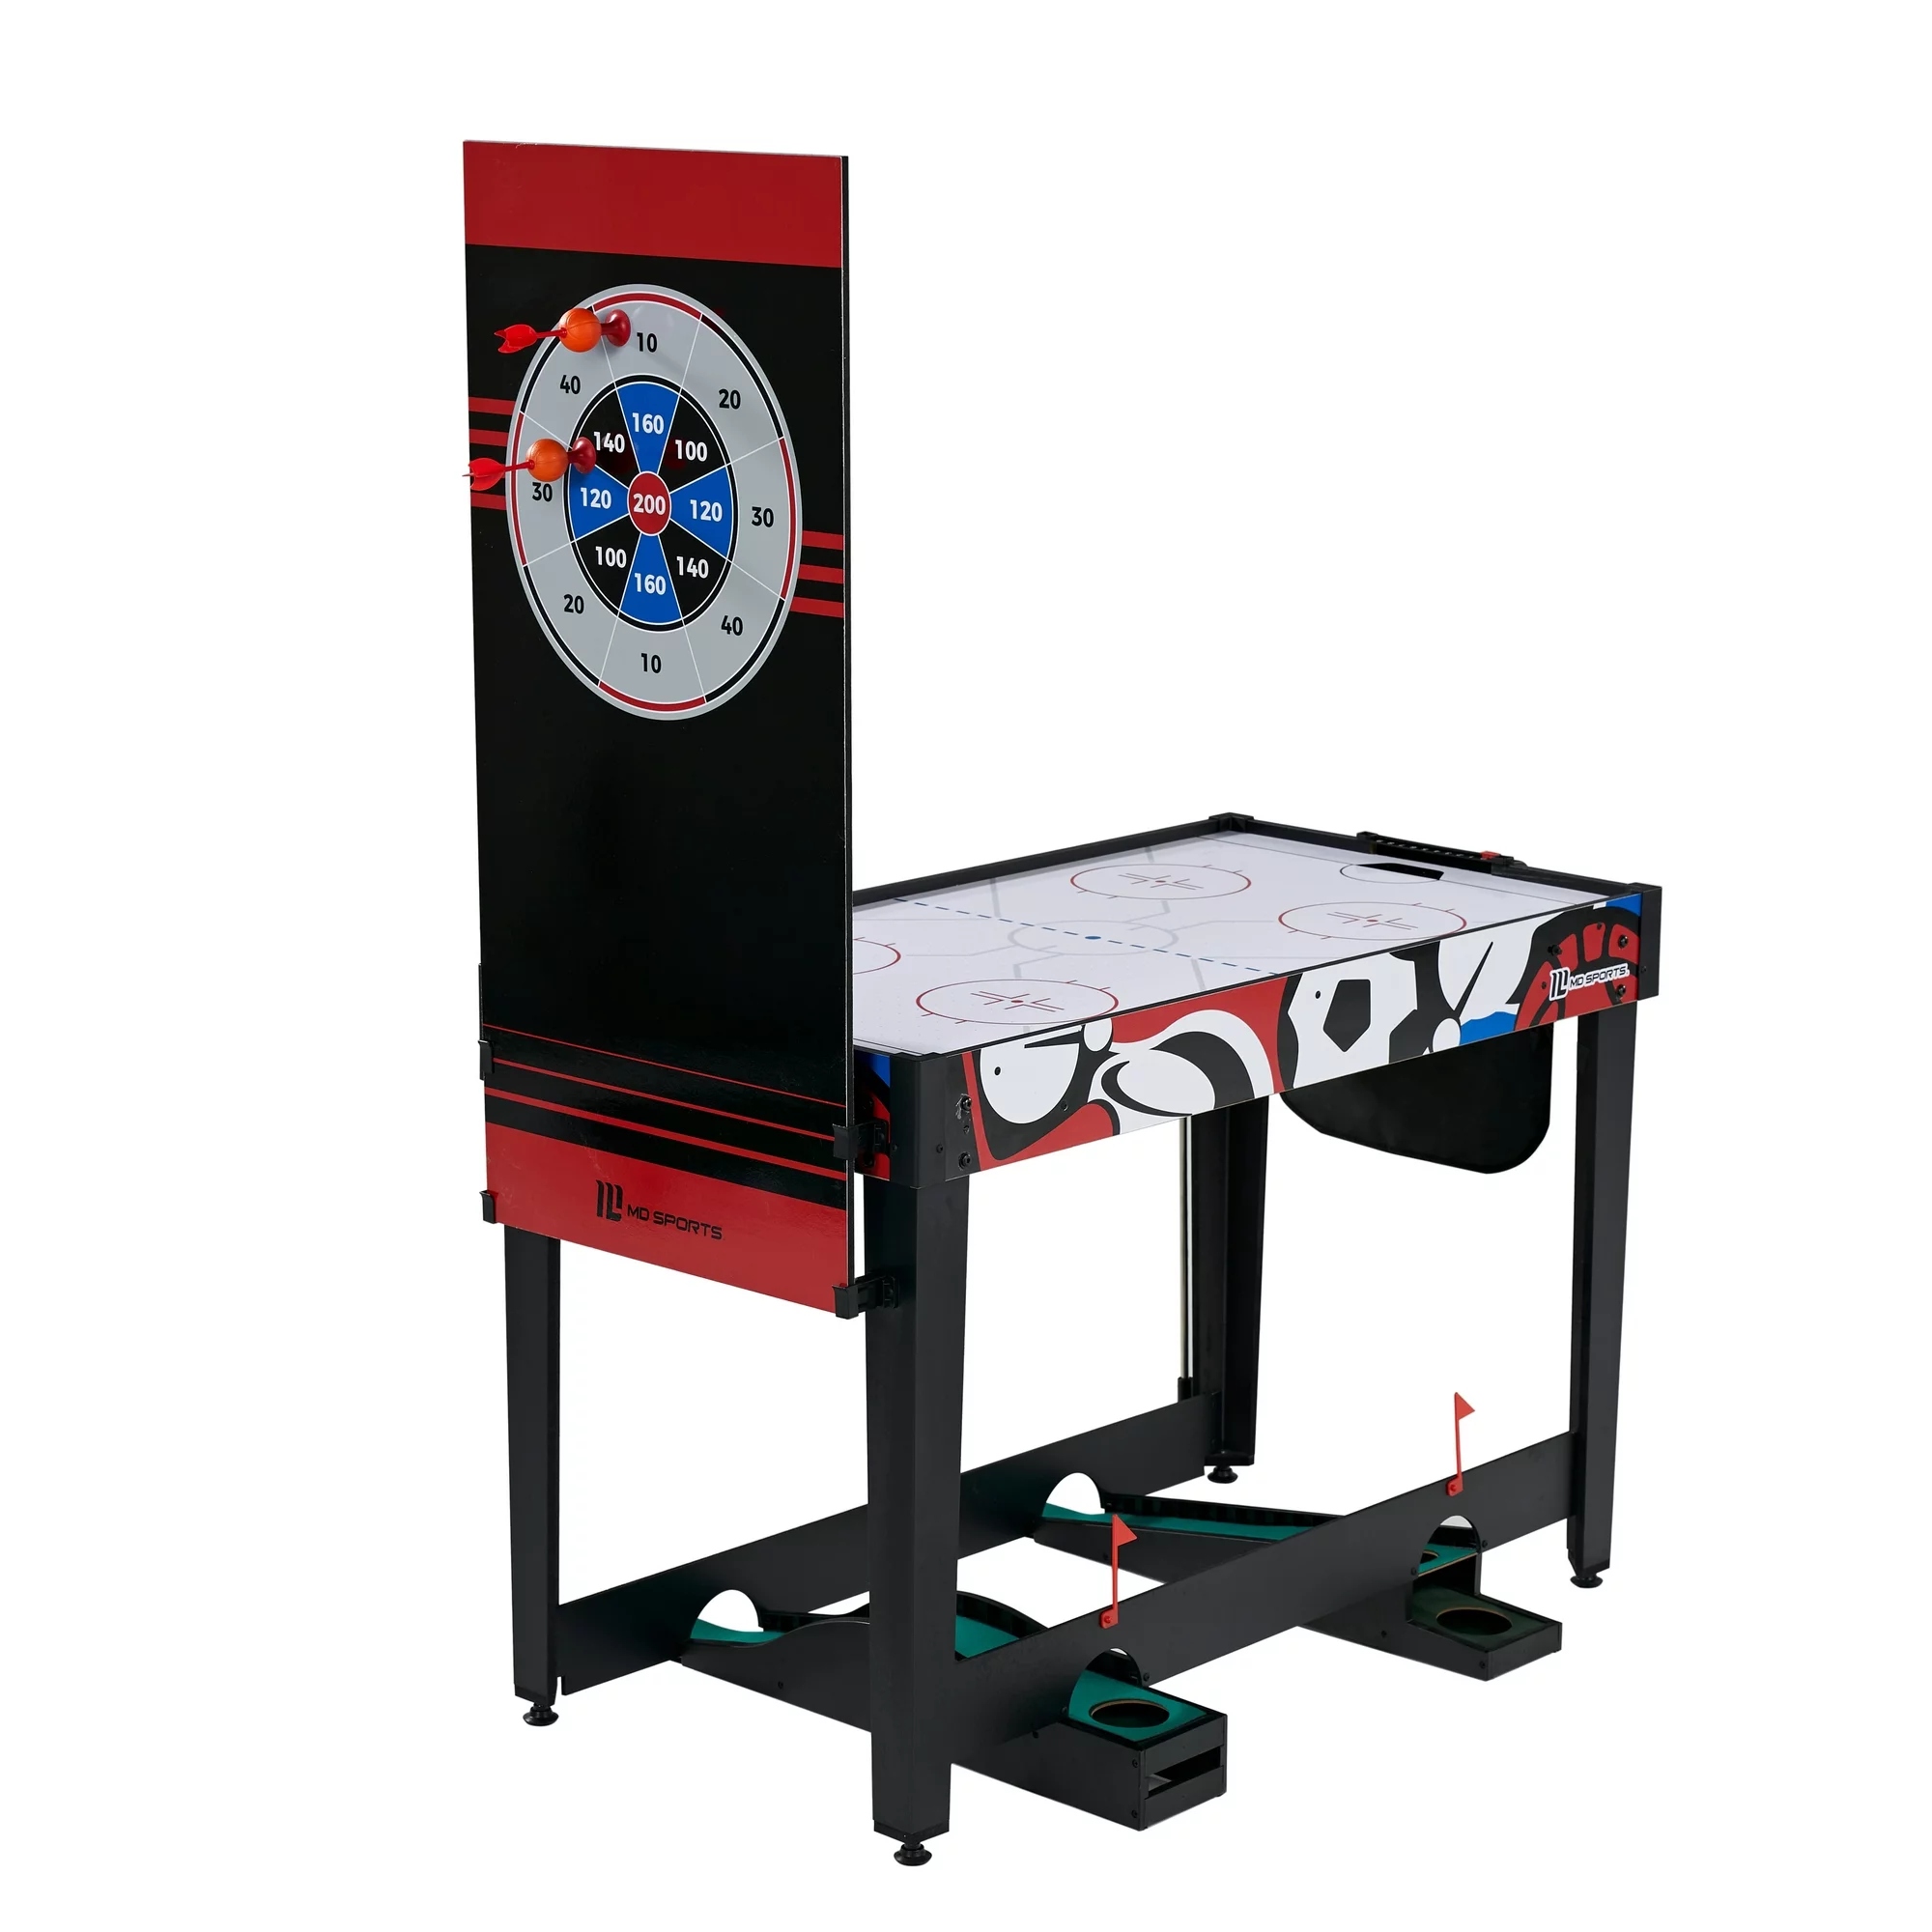 Darts section of the MD Sports 48 Inch 7 In-1 Combo Table